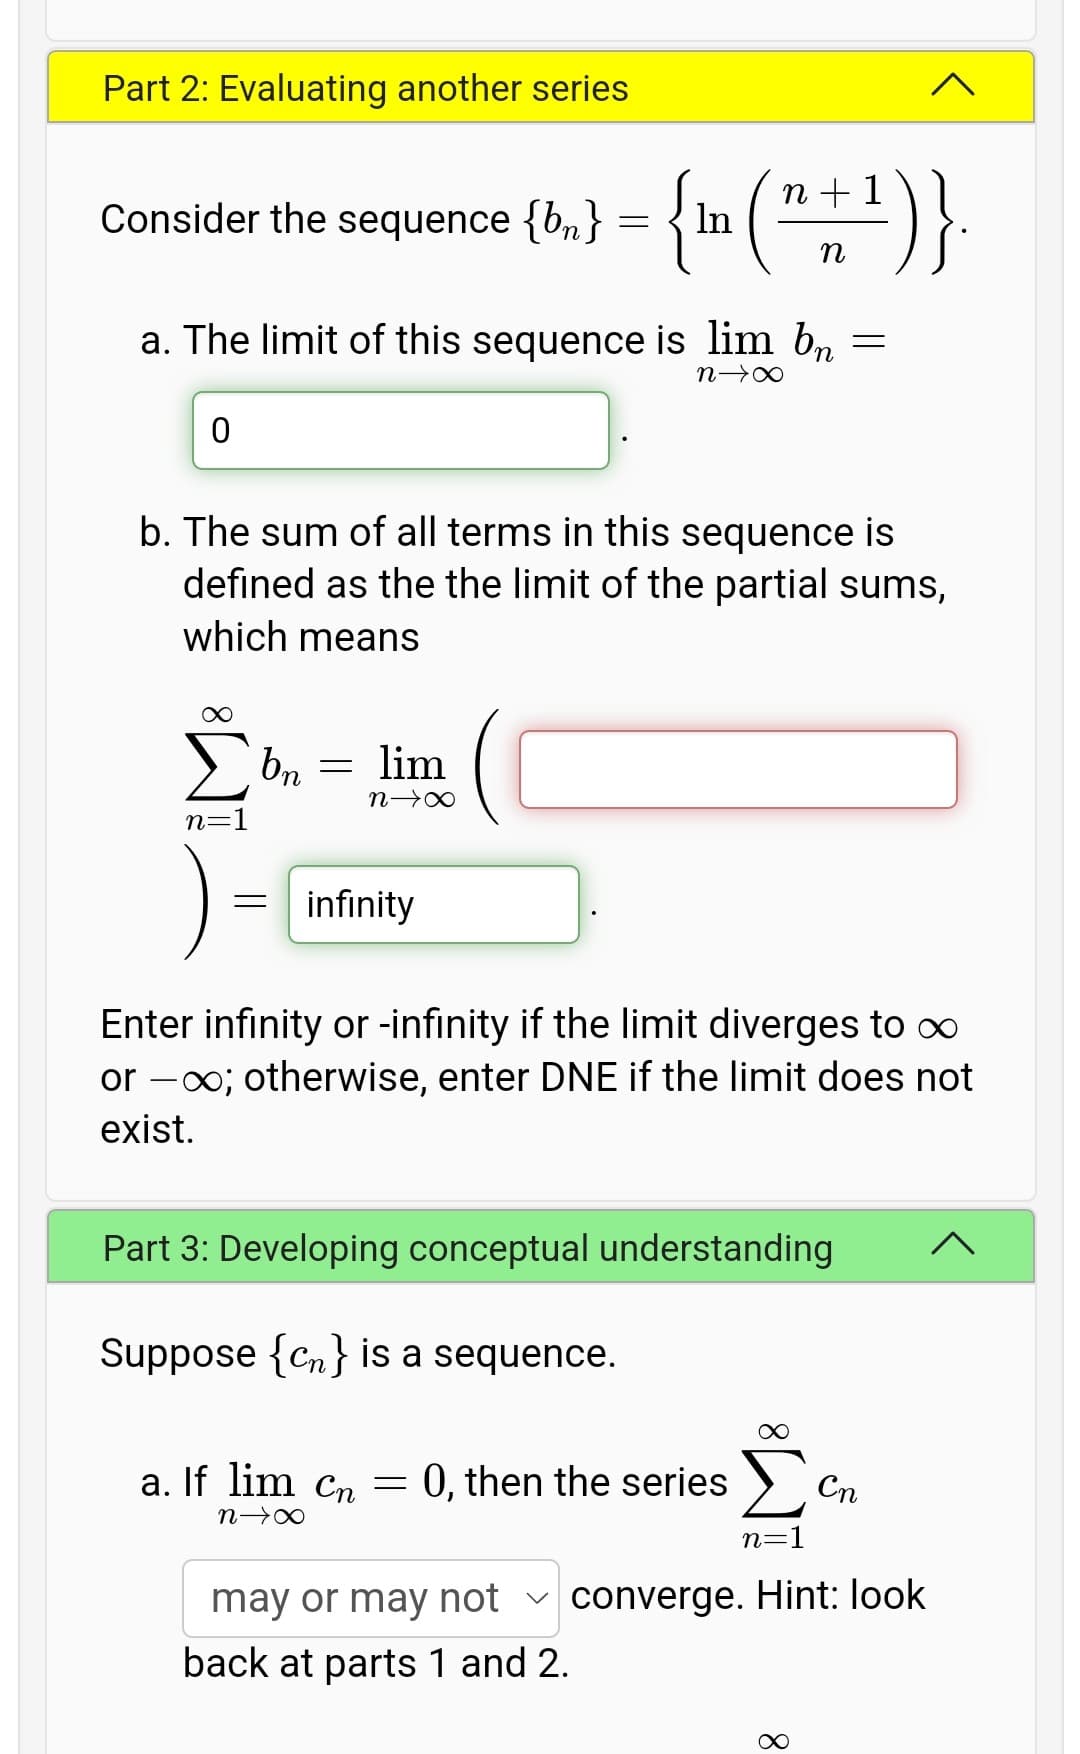 Part 2: Evaluating another series
{m (")}
Consider the sequence {bn}
n + 1
In
a. The limit of this sequence is lim b, =
b. The sum of all terms in this sequence is
defined as the the limit of the partial sums,
which means
bn
lim
n=1
).
infinity
Enter infinity or -infinity if the limit diverges to ∞
or -00; otherwise, enter DNE if the limit does not
exist.
Part 3: Developing conceptual understanding
Suppose {Cn} is a sequence.
a. If lim Cn = 0, then the series >
Cn
n=1
may or may hot v converge. Hint: look
back at parts 1 and 2.
8.
